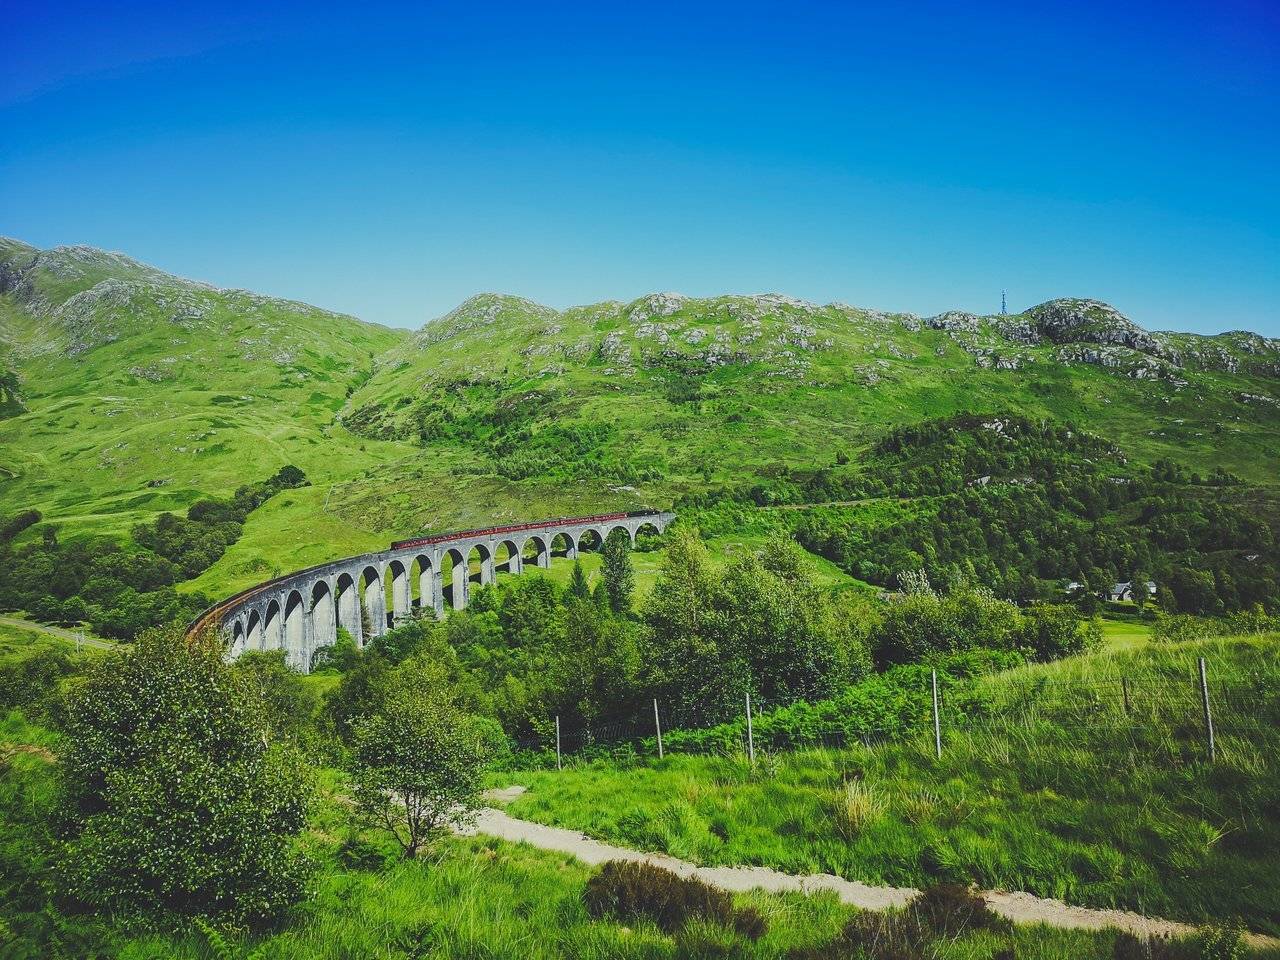   The Jacobite train on Glenfinnan Viaduct from Mallaig could be seen 15 minutes after the one rolling from Fort WIlliam. Photo by Alis Monte [CC BY-SA 4.0], via Connecting the Dots